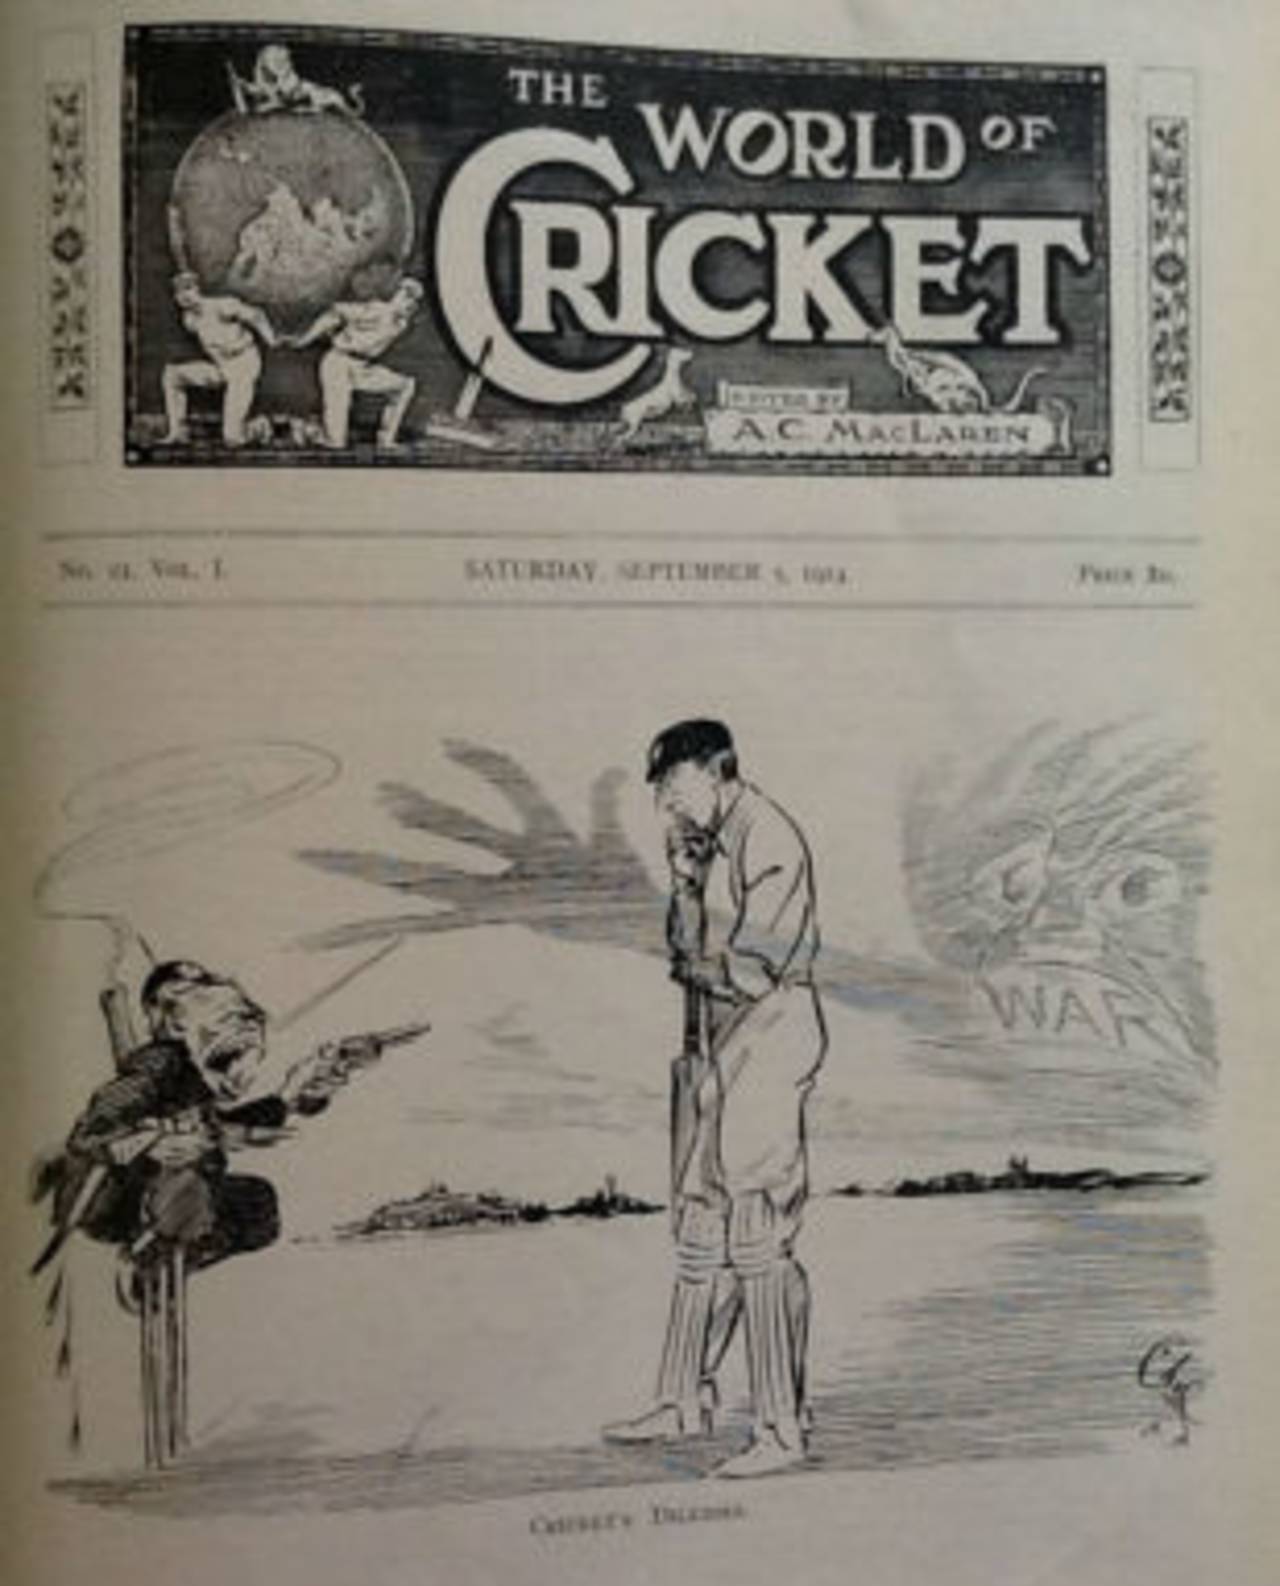 The cover of <I>Cricket</I> magazine days after the season was prematurely ended, September 5, 1914